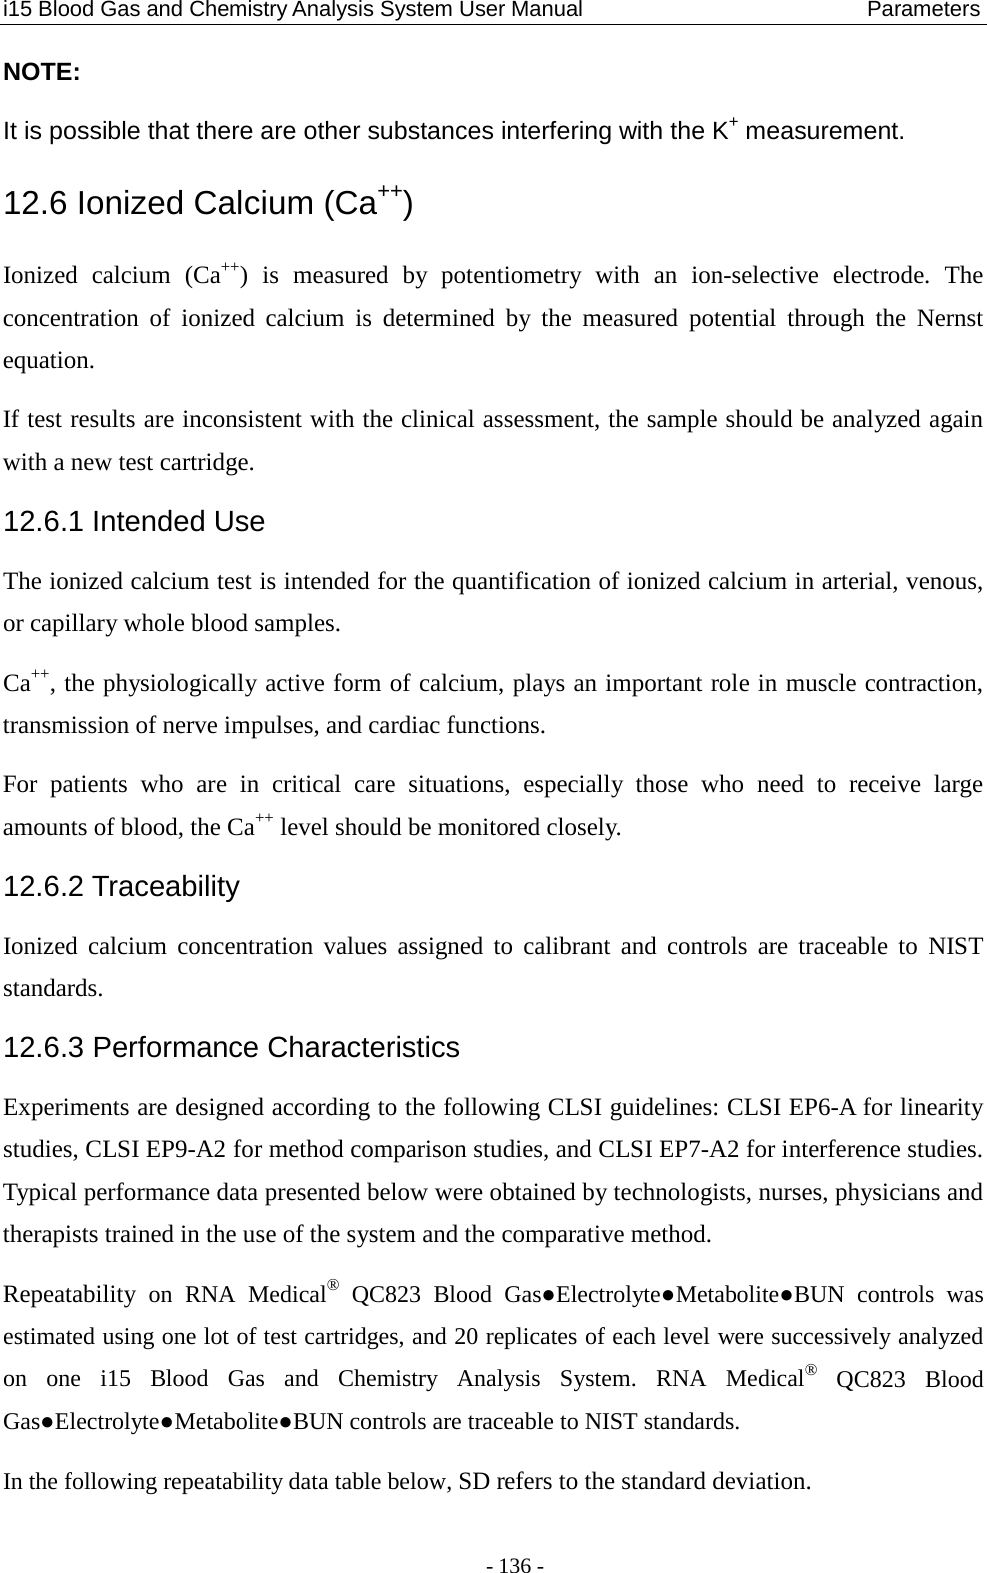 i15 Blood Gas and Chemistry Analysis System User Manual                            Parameters - 136 - NOTE: It is possible that there are other substances interfering with the K+ measurement. 12.6 Ionized Calcium (Ca++) Ionized calcium (Ca++)  is measured by potentiometry with an ion-selective electrode.  The concentration of ionized calcium is determined by the measured potential through the Nernst equation. If test results are inconsistent with the clinical assessment, the sample should be analyzed again with a new test cartridge. 12.6.1 Intended Use The ionized calcium test is intended for the quantification of ionized calcium in arterial, venous, or capillary whole blood samples. Ca++, the physiologically active form of calcium, plays an important role in muscle contraction, transmission of nerve impulses, and cardiac functions. For patients who are in critical care situations, especially those who need to receive large amounts of blood, the Ca++ level should be monitored closely. 12.6.2 Traceability Ionized calcium concentration values assigned to calibrant and controls are traceable to NIST standards. 12.6.3 Performance Characteristics Experiments are designed according to the following CLSI guidelines: CLSI EP6-A for linearity studies, CLSI EP9-A2 for method comparison studies, and CLSI EP7-A2 for interference studies. Typical performance data presented below were obtained by technologists, nurses, physicians and therapists trained in the use of the system and the comparative method. Repeatability on RNA Medical® QC823 Blood Gas●Electrolyte●Metabolite●BUN  controls  was estimated using one lot of test cartridges, and 20 replicates of each level were successively analyzed on  one  i15 Blood Gas and Chemistry Analysis System. RNA Medical® QC823 Blood Gas●Electrolyte●Metabolite●BUN controls are traceable to NIST standards. In the following repeatability data table below, SD refers to the standard deviation. 